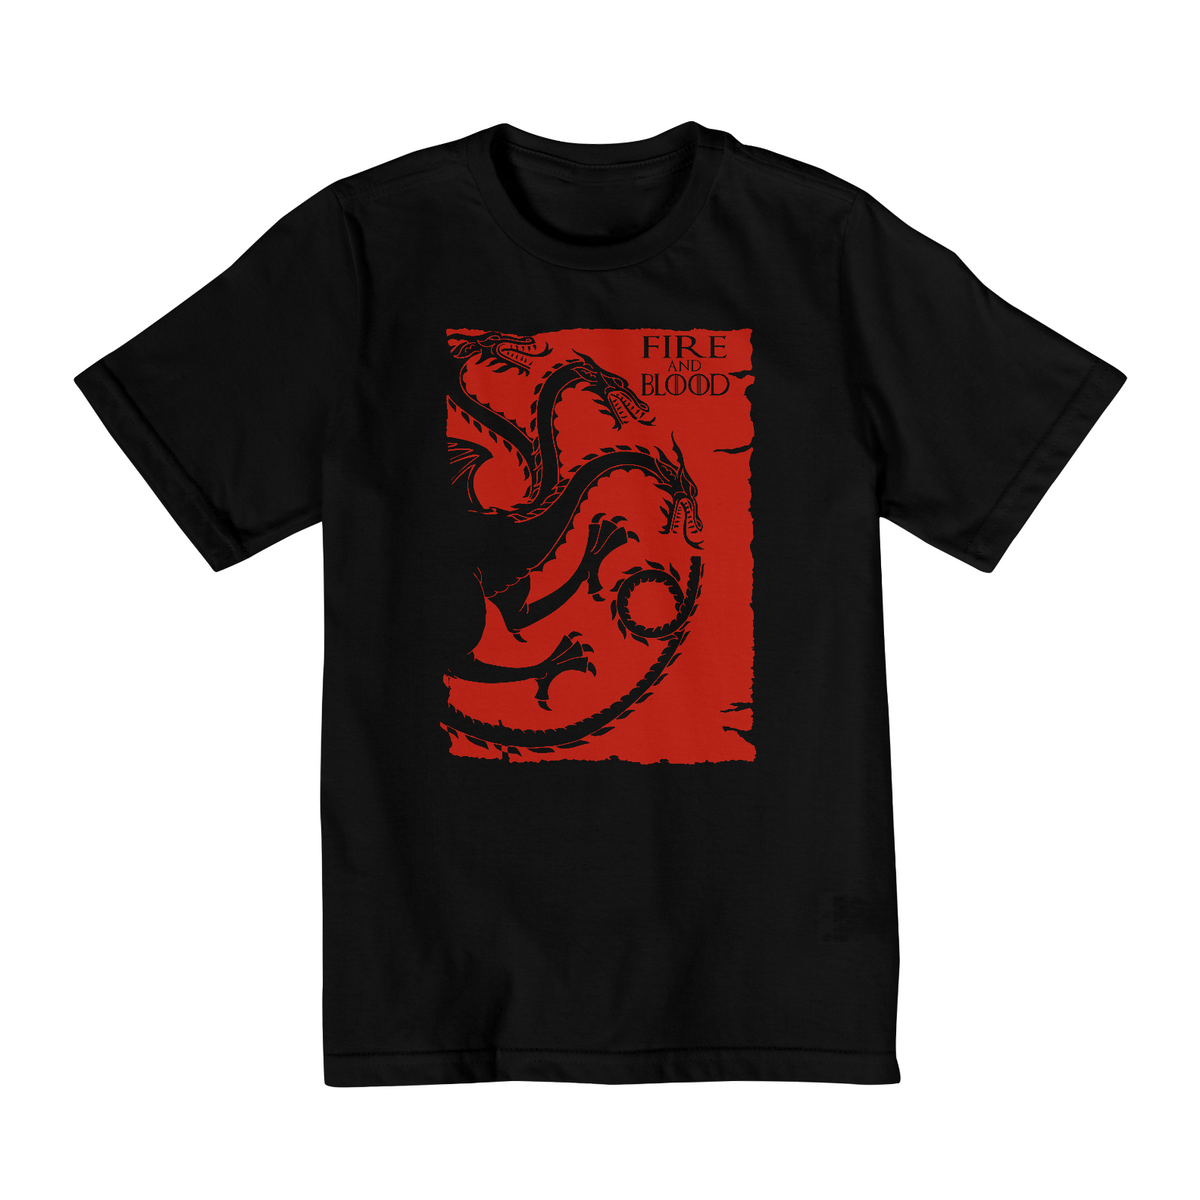 Nome do produto: Camiseta Infantil (10 a 14) Game of Thrones Fire And Blood